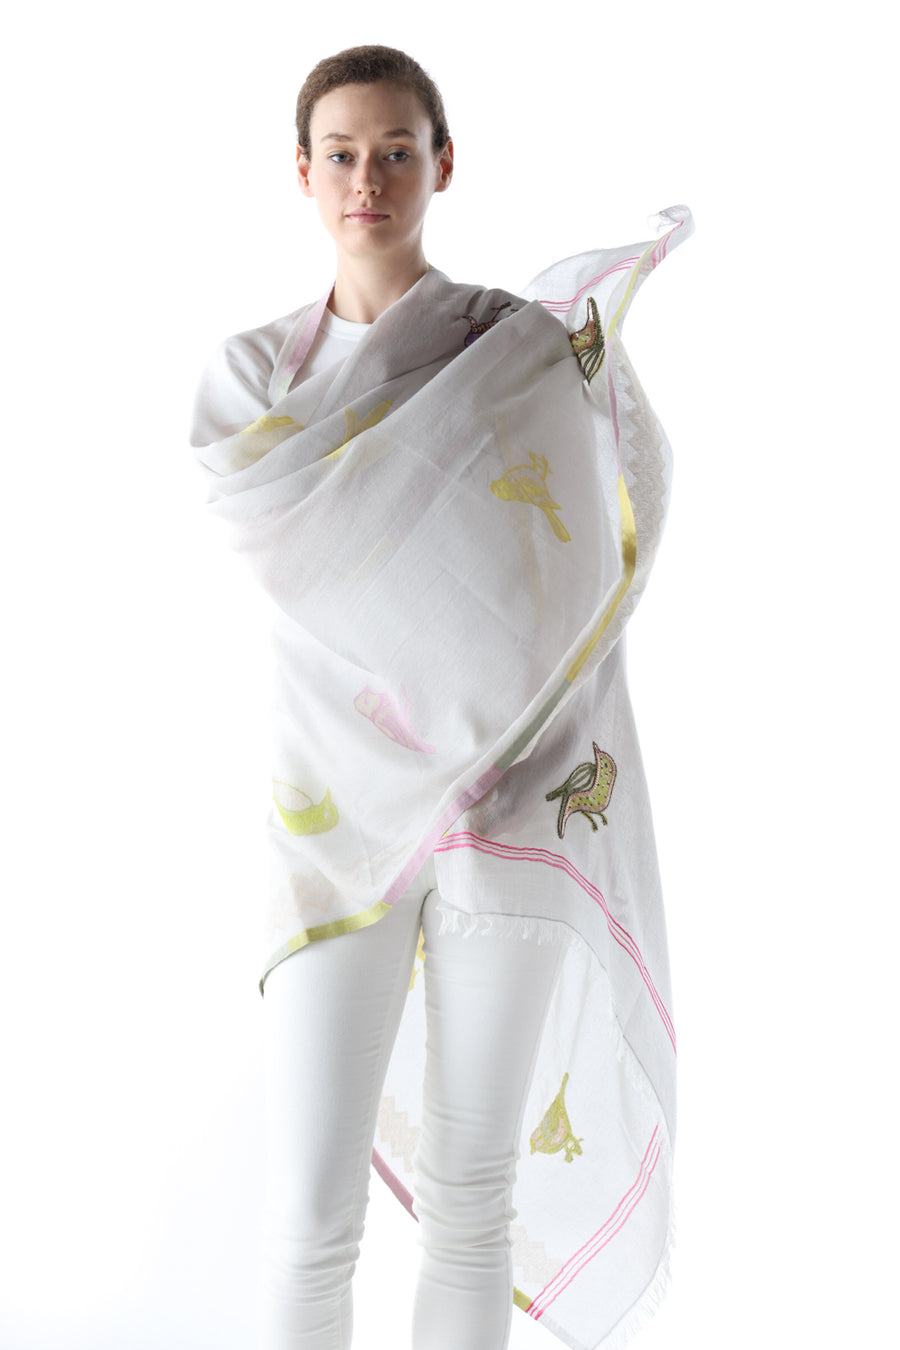 CHIE IMAI Scarf Collection - Light Of Agra/Bird Of Paradise/ Soaring Butterflies/Promenade